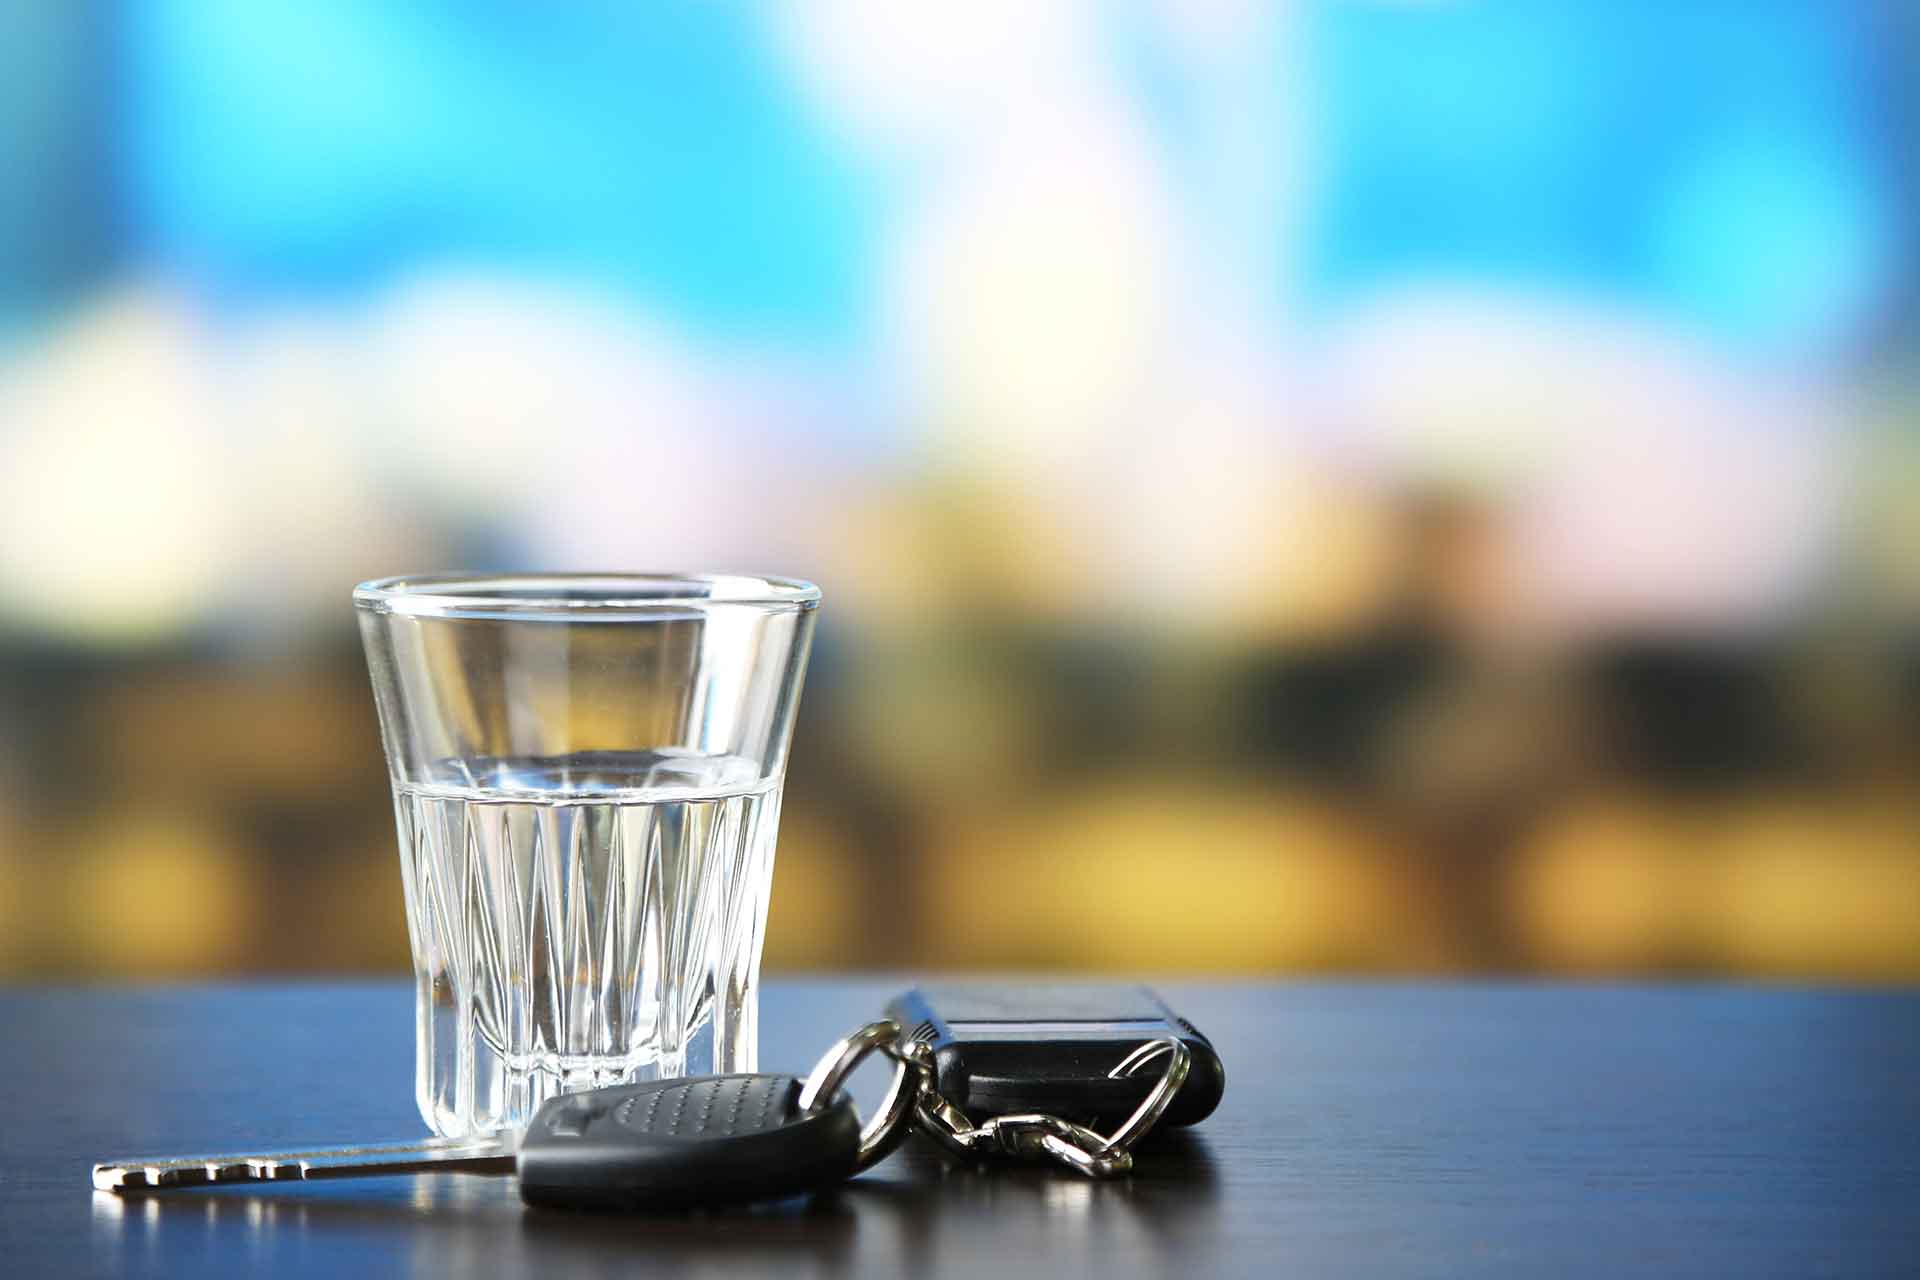 Ohio Bill Proposes Ignition Locks for Drunk Drivers